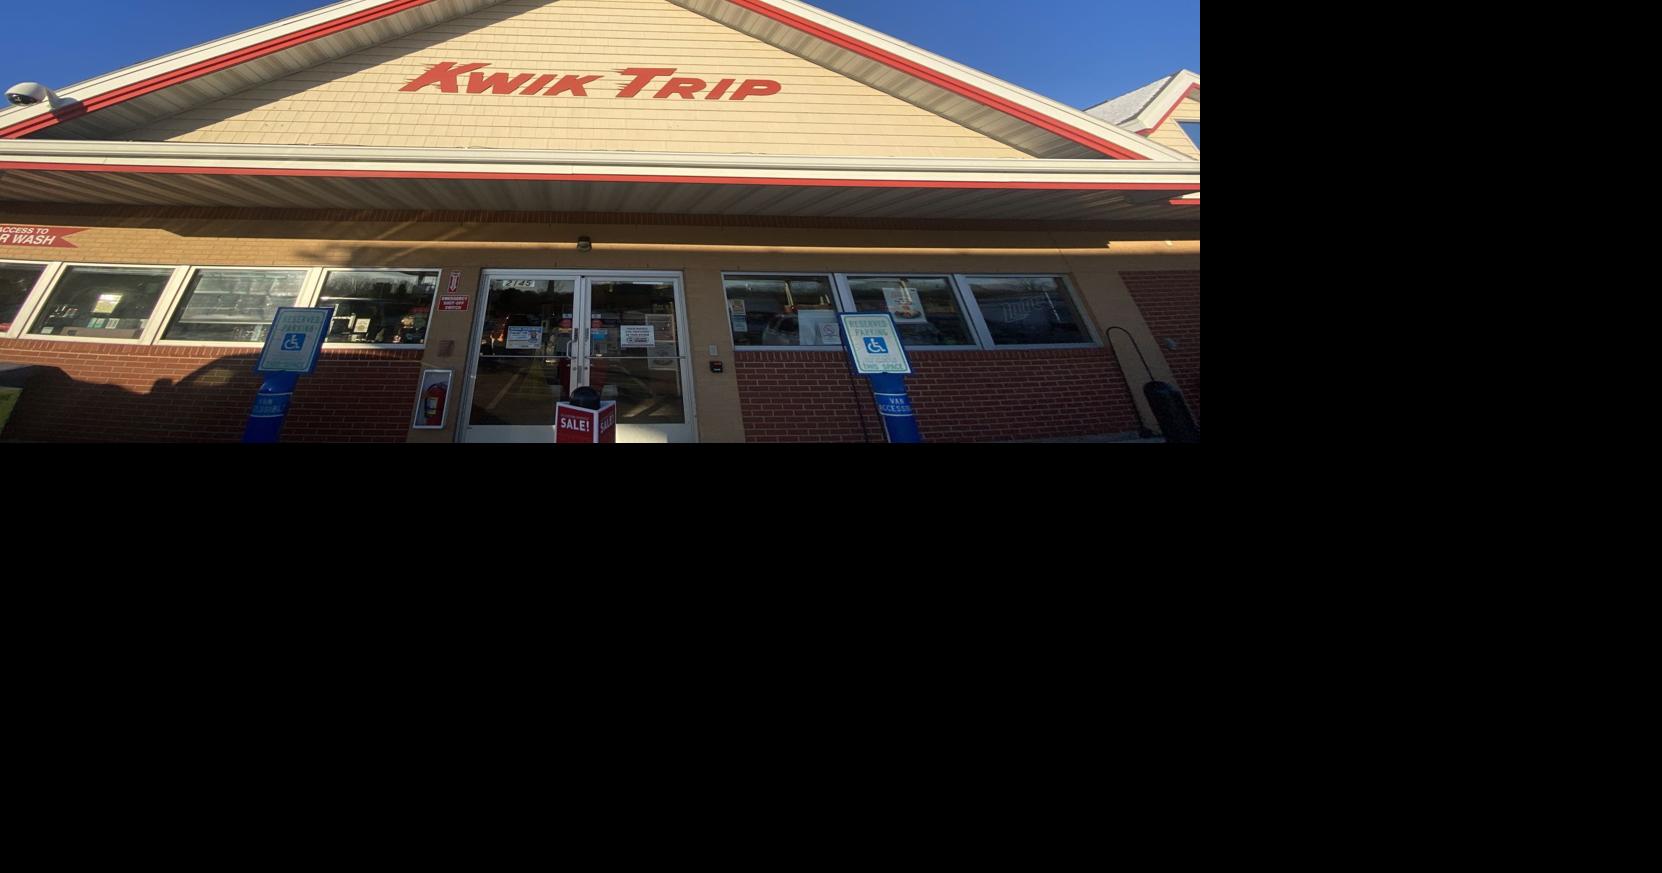 Kwik Trip recovering after 'cybersecurity incident